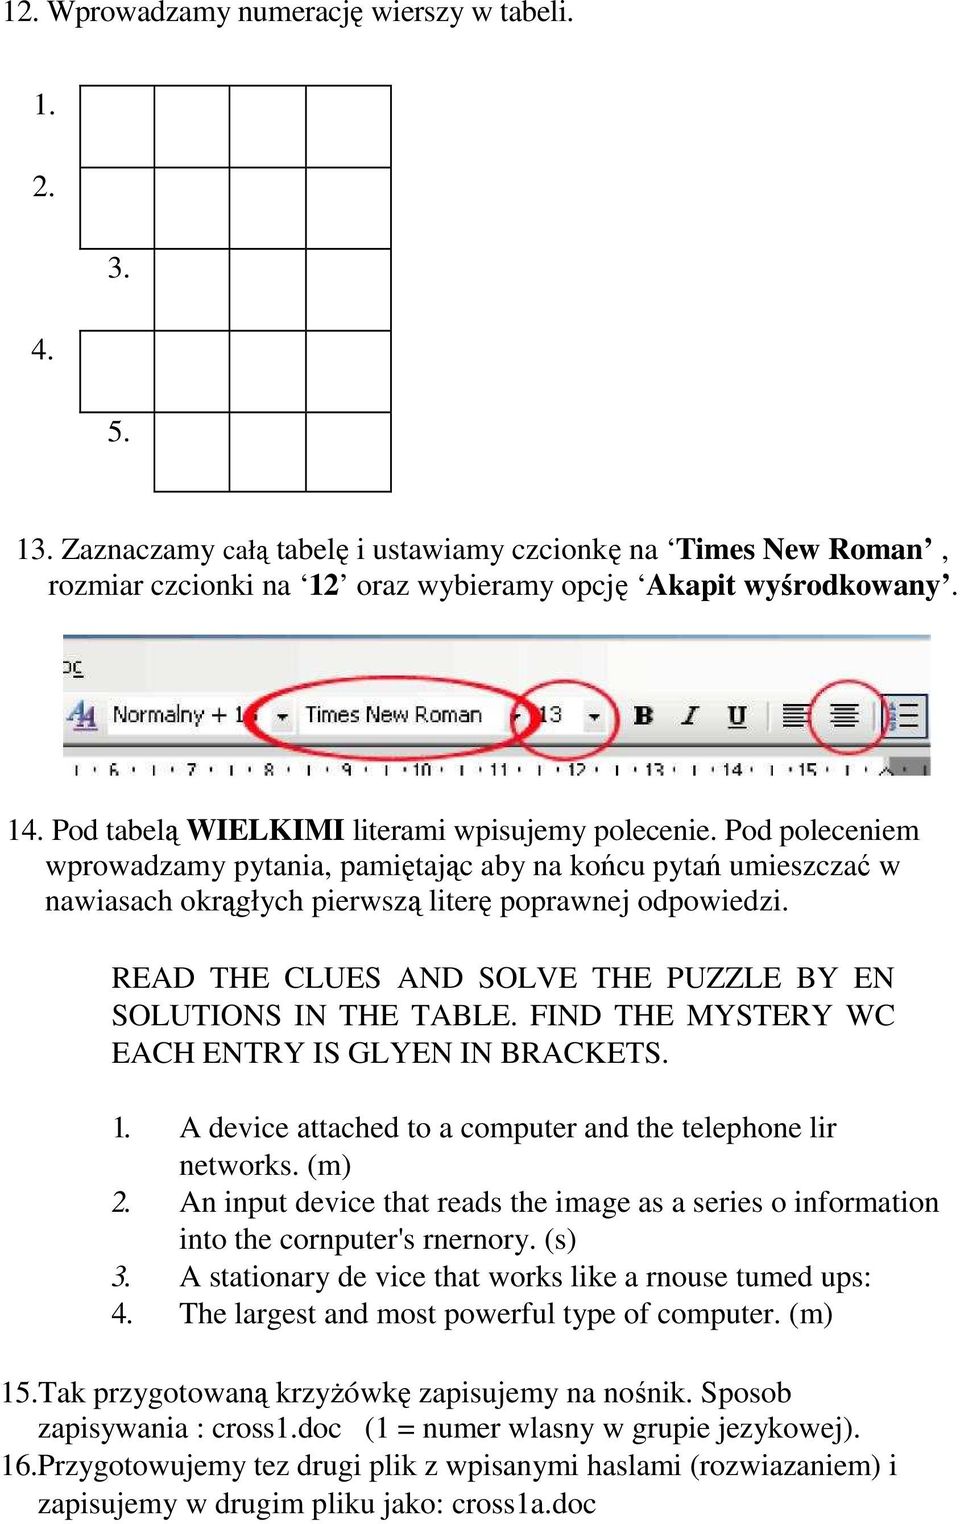 READ THE CLUES AND SOLVE THE PUZZLE BY EN SOLUTIONS IN THE TABLE. FIND THE MYSTERY WC EACH ENTRY IS GLYEN IN BRACKETS. 1. A device attached to a computer and the telephone lir networks. (m) 2.